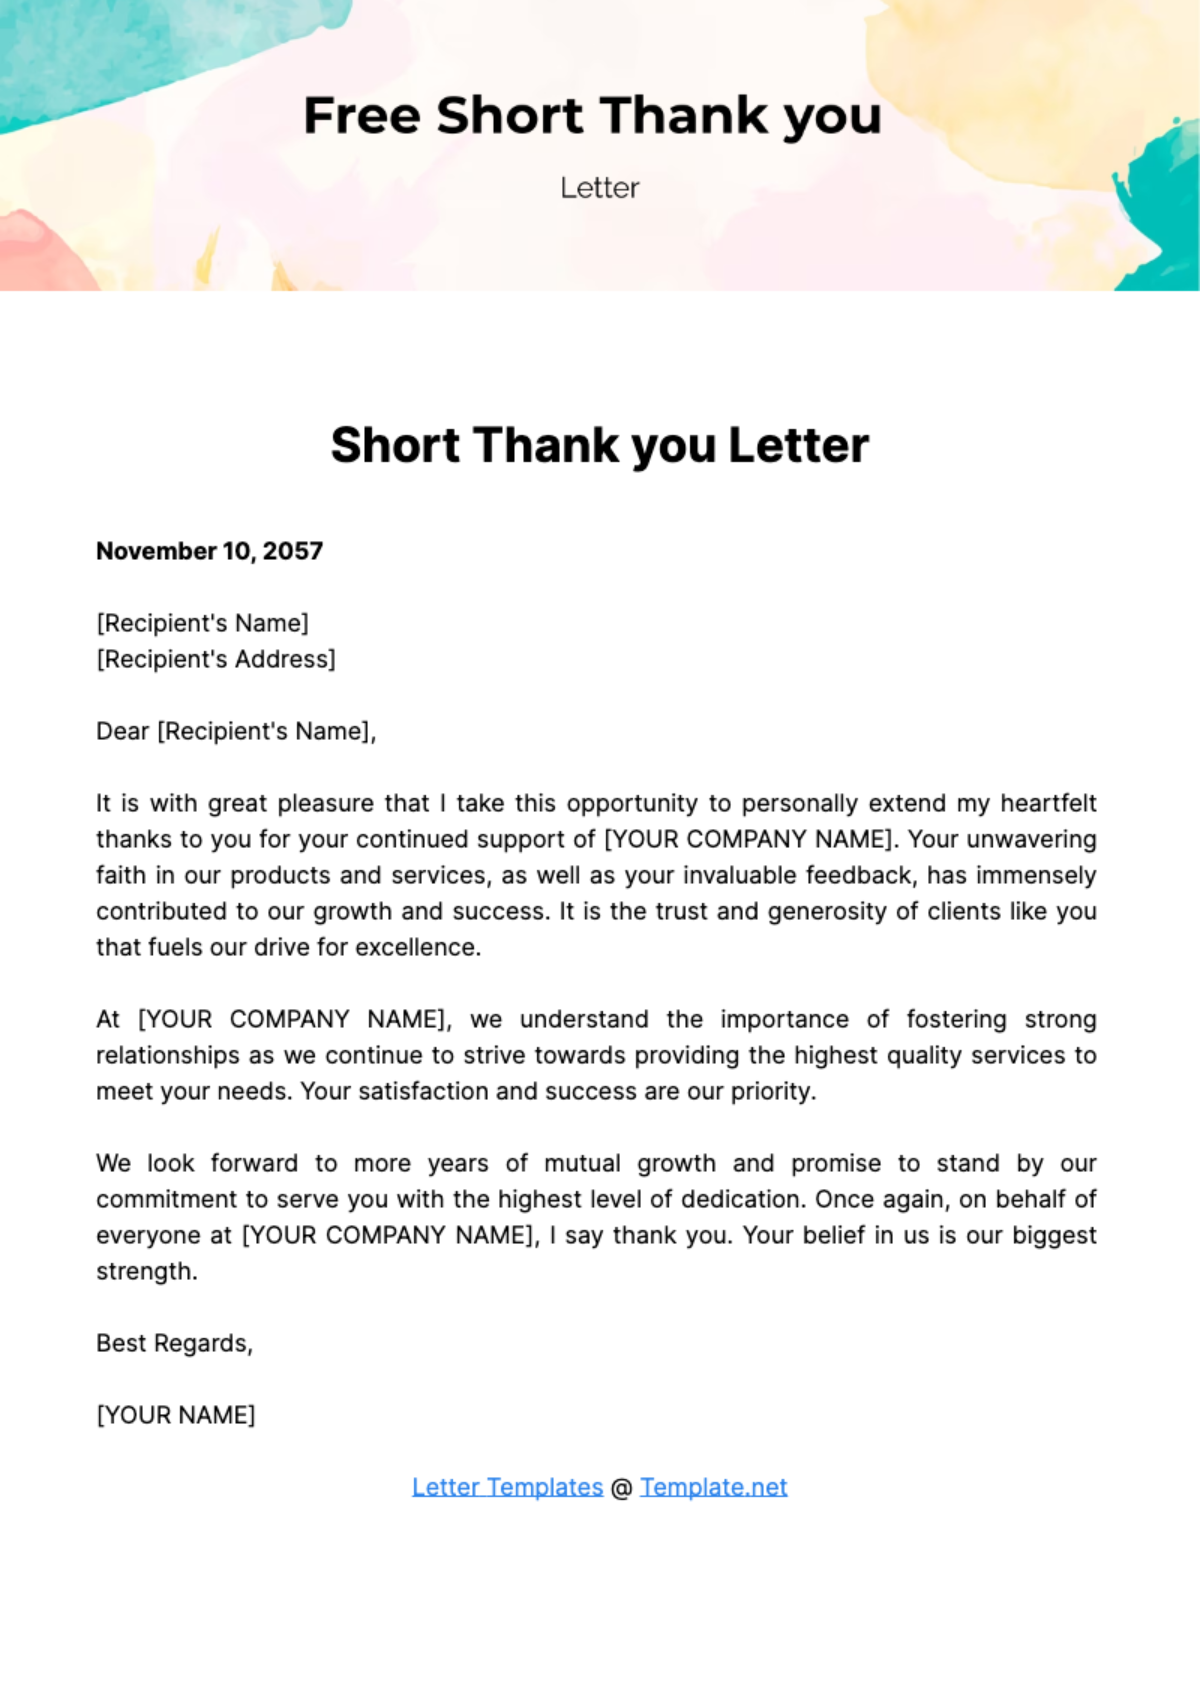 Free Short Thank you Letter Template